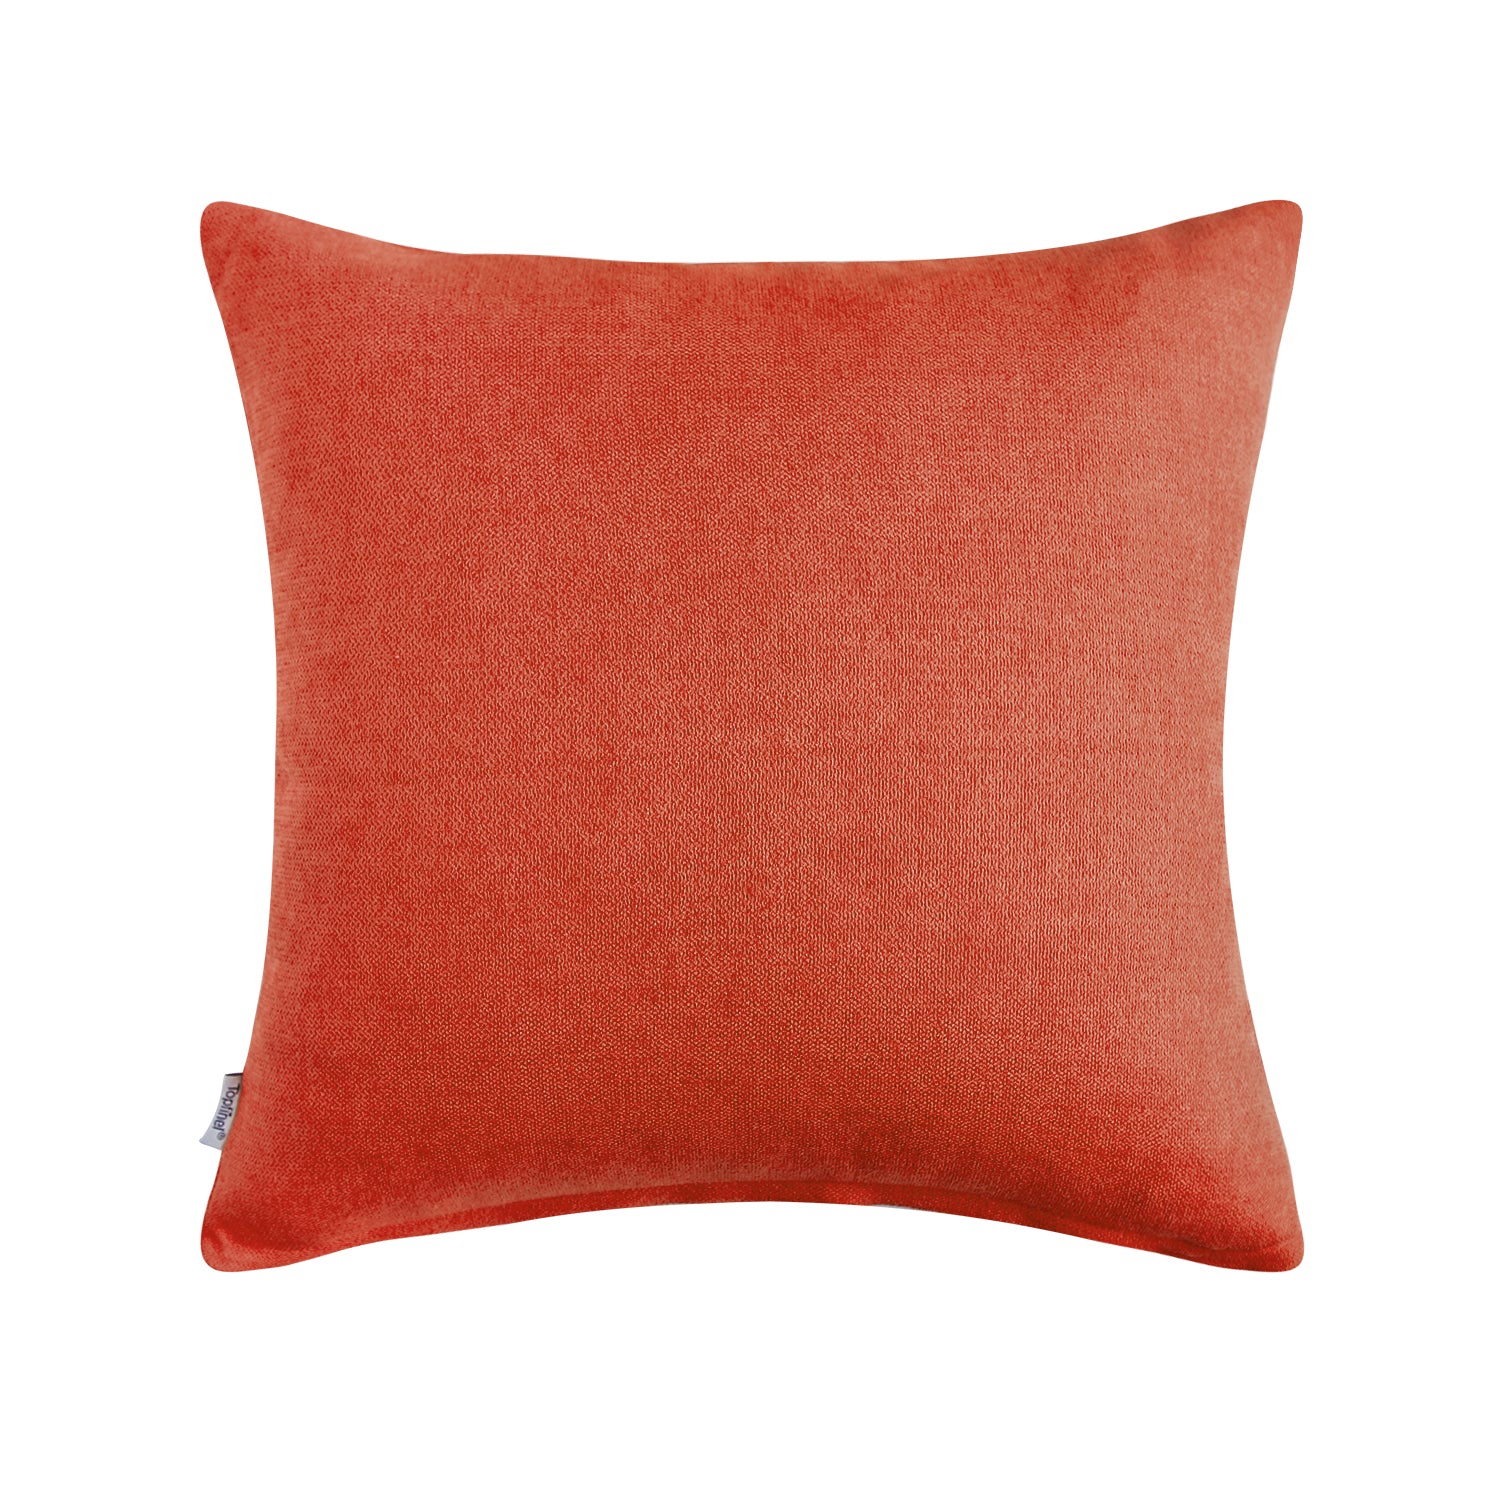 Chenille Pillow Covers Bedroom Decoration Square Solid Color